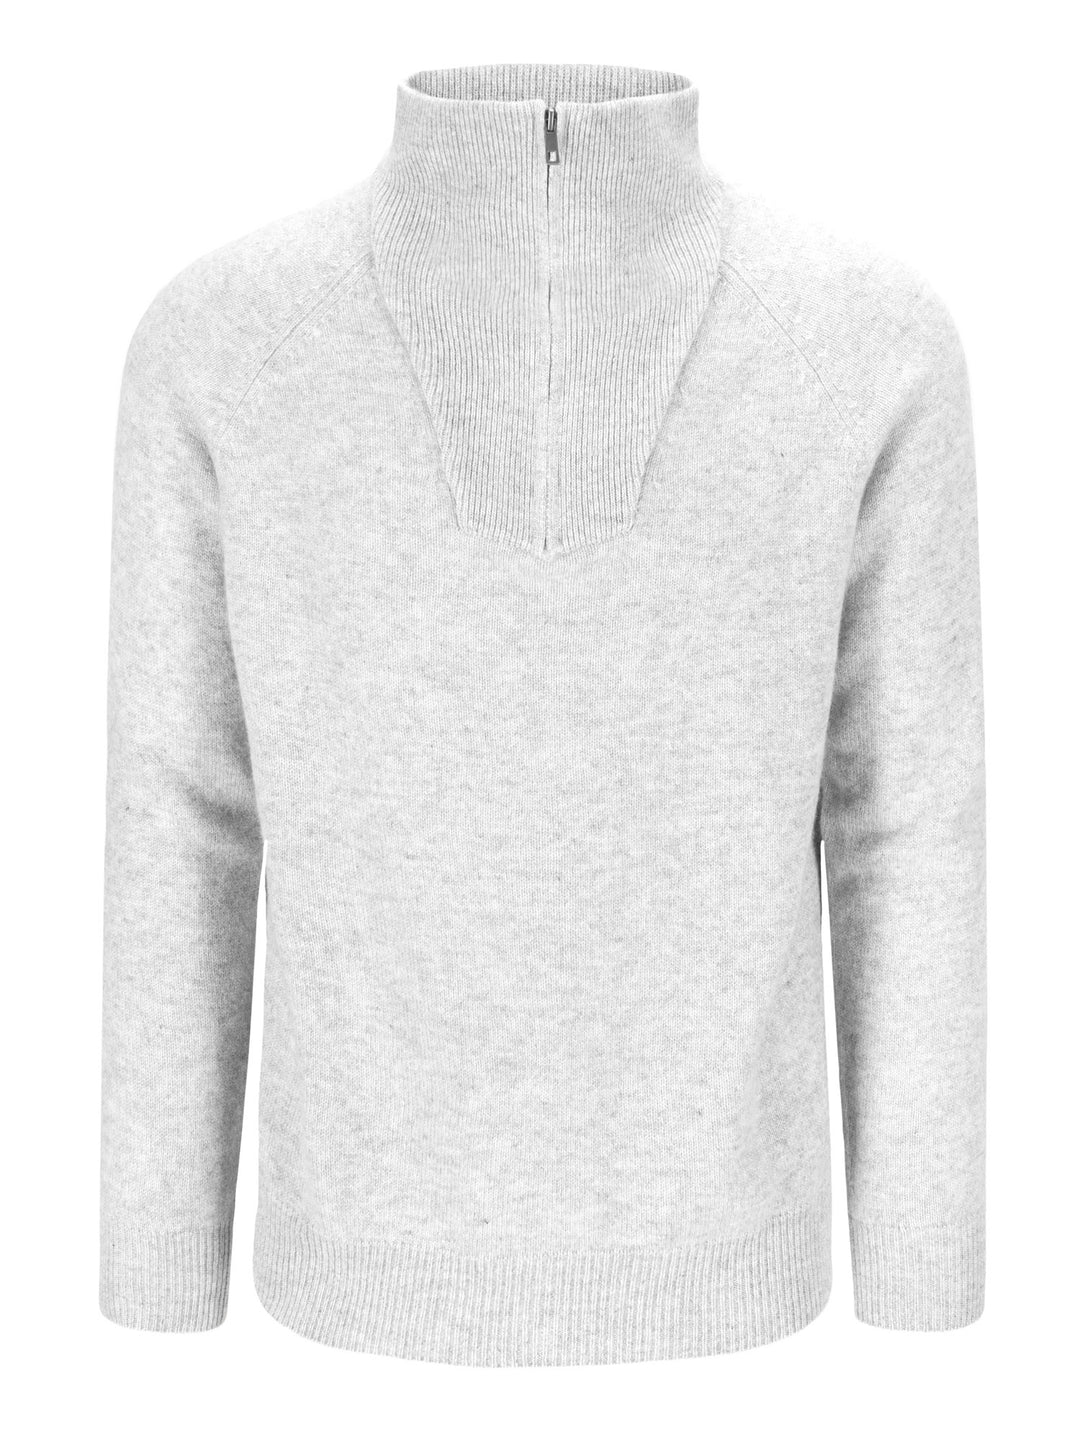 Mens cashmere sweater "frost" 100% cashmere from Kashmina